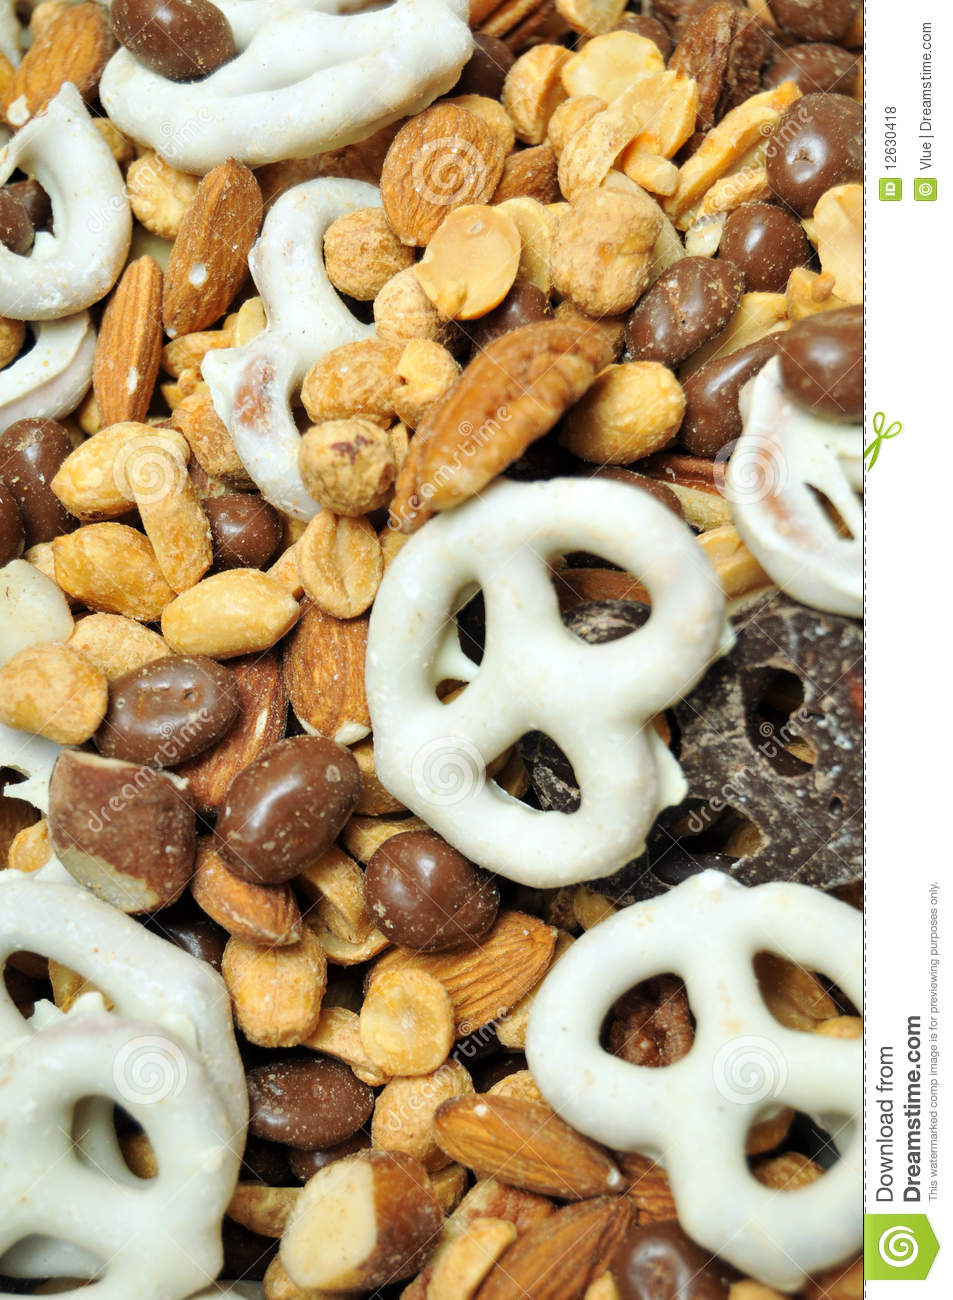 Trail Mix Contains White Chocolate Covered Pretzels Chocolate Covered